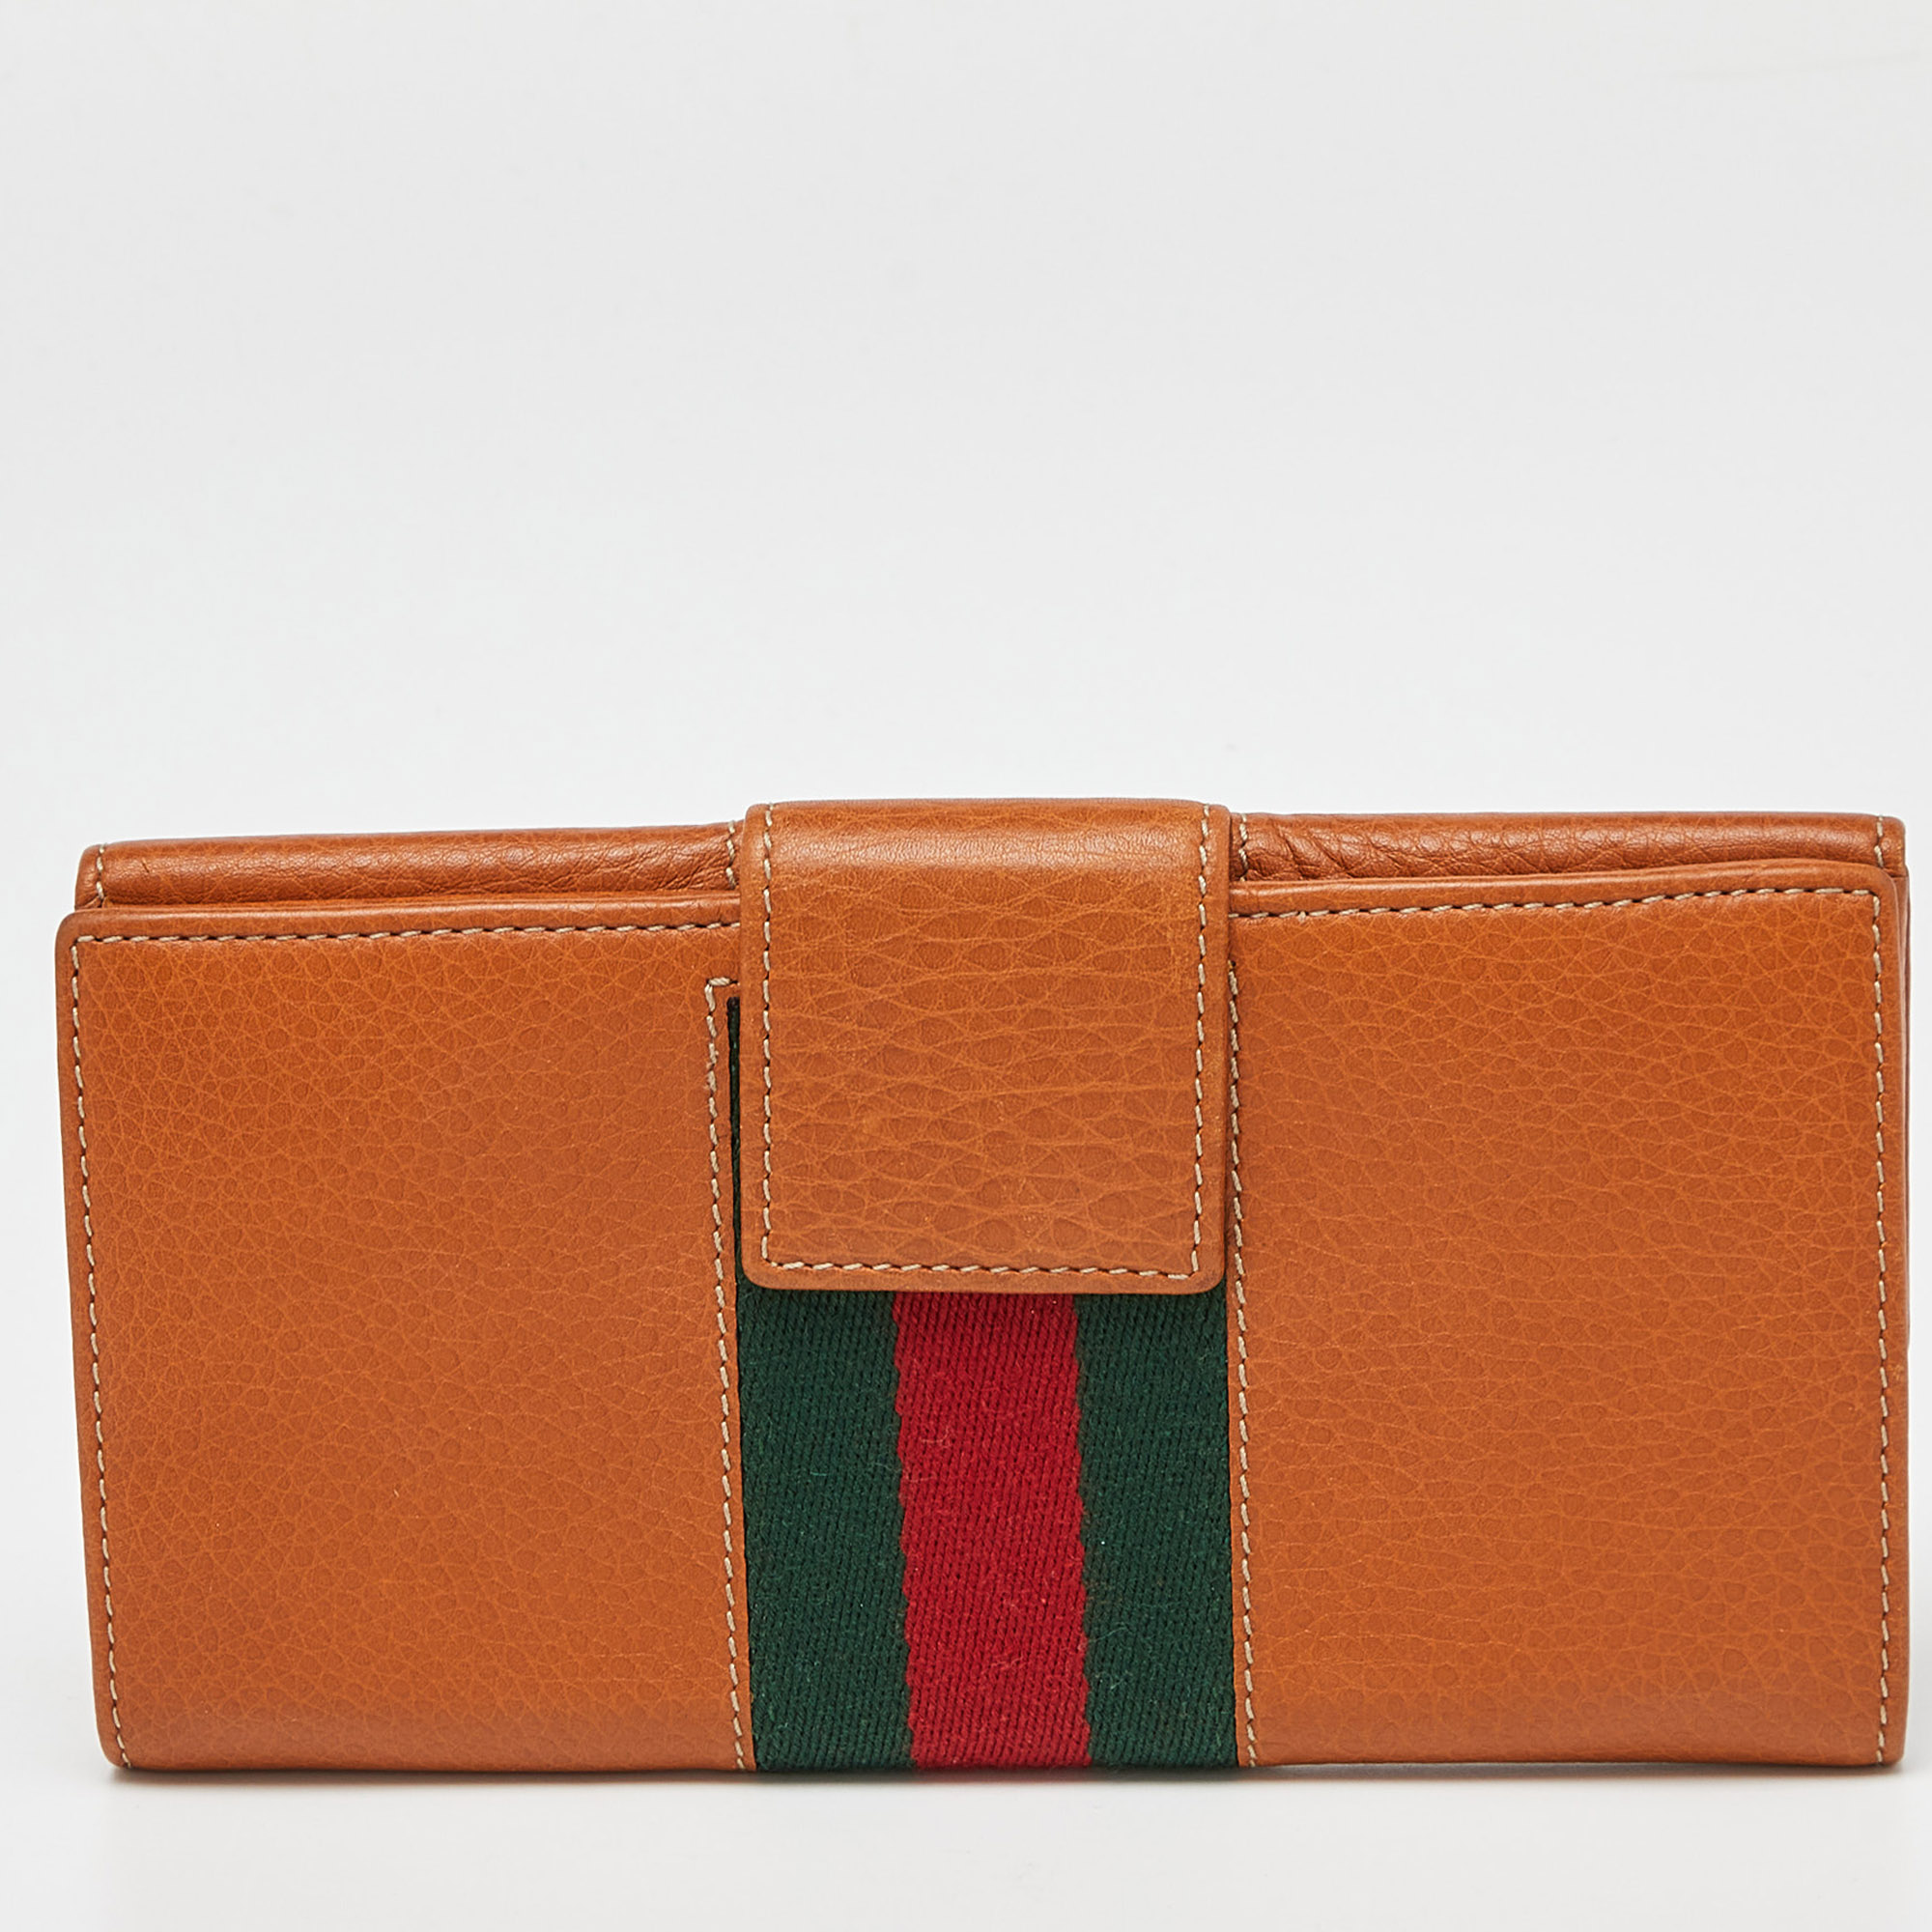 Gucci Tan Leather Flap Continental Wallet